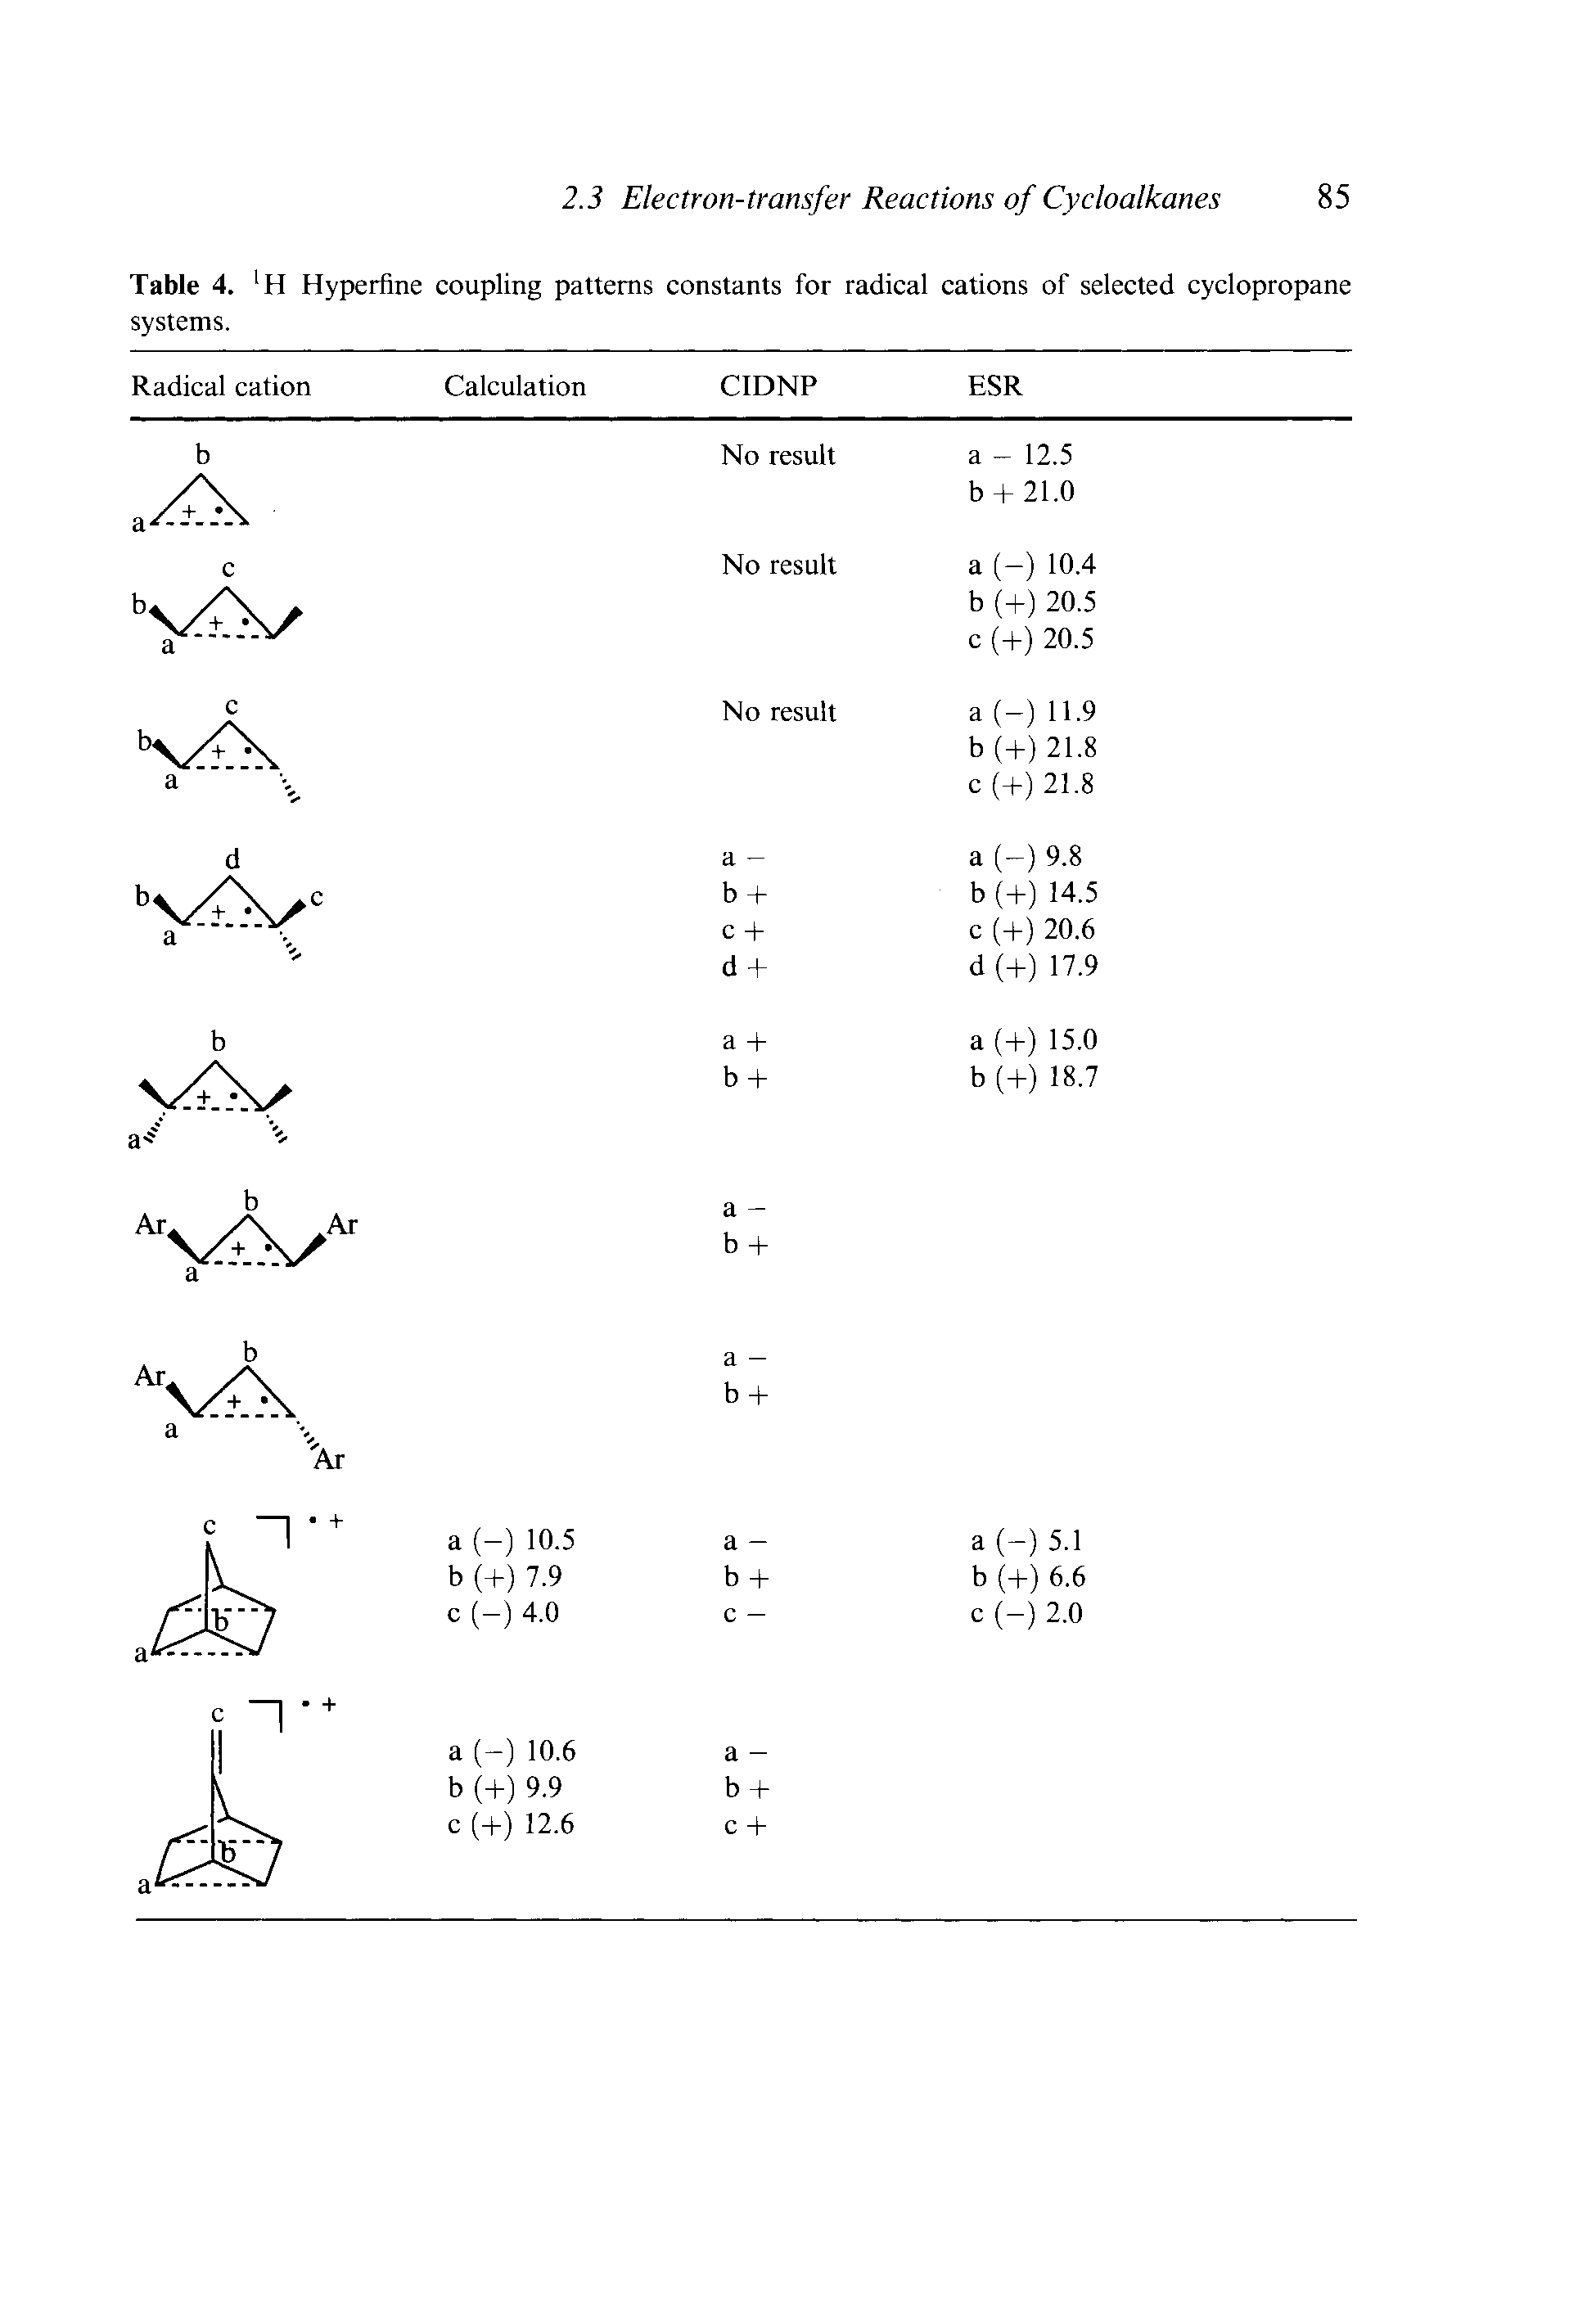 Table 4. H Hyperfine coupling patterns constants for radical cations of selected cyclopropane systems.